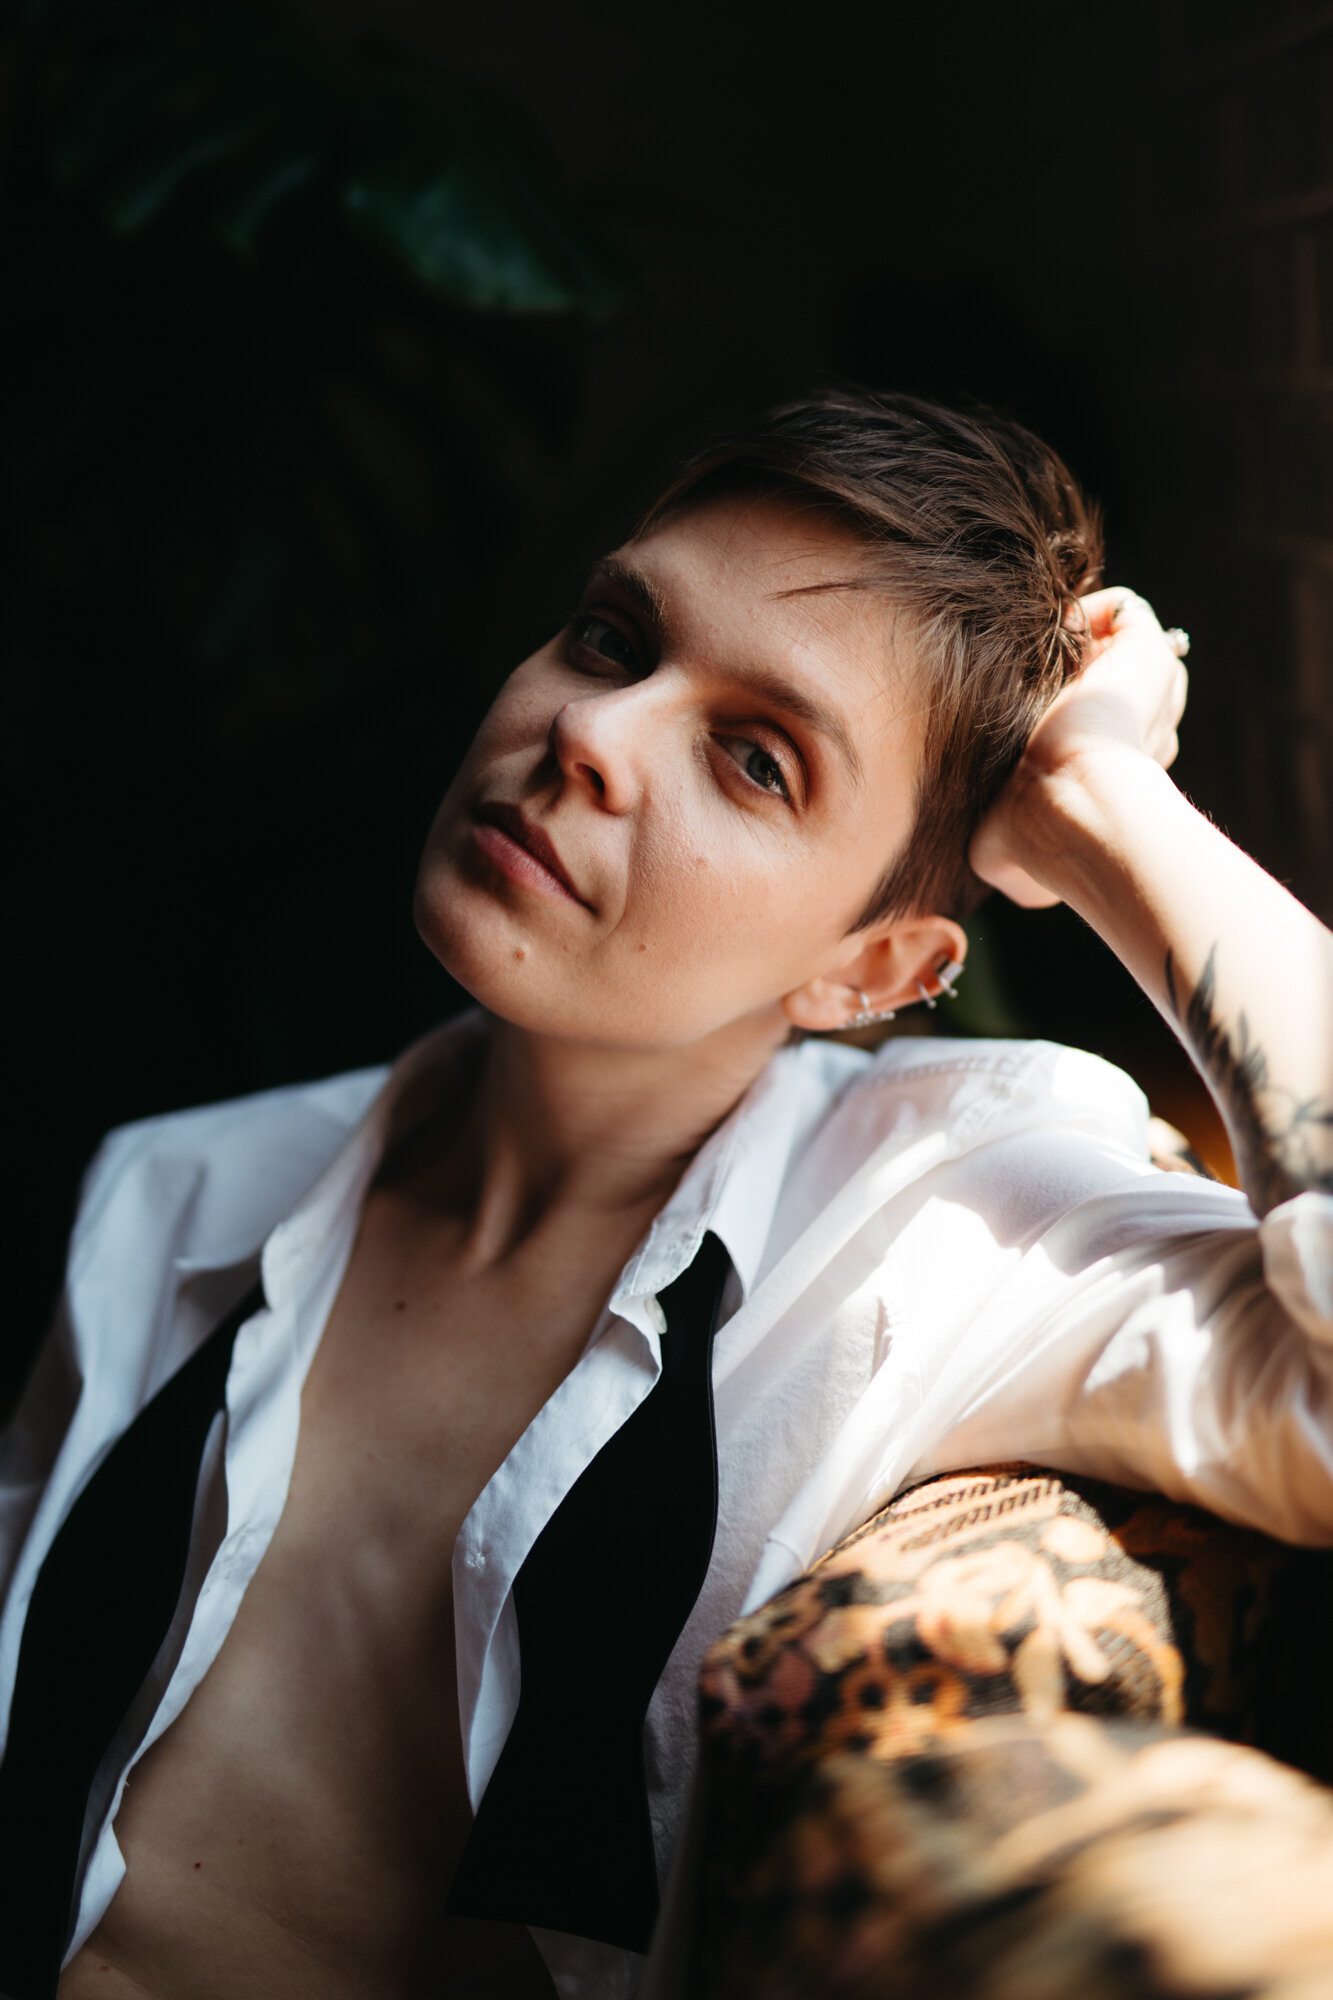 Genderqueer person in masculine outfit with shirt unbuttoned staring into camera